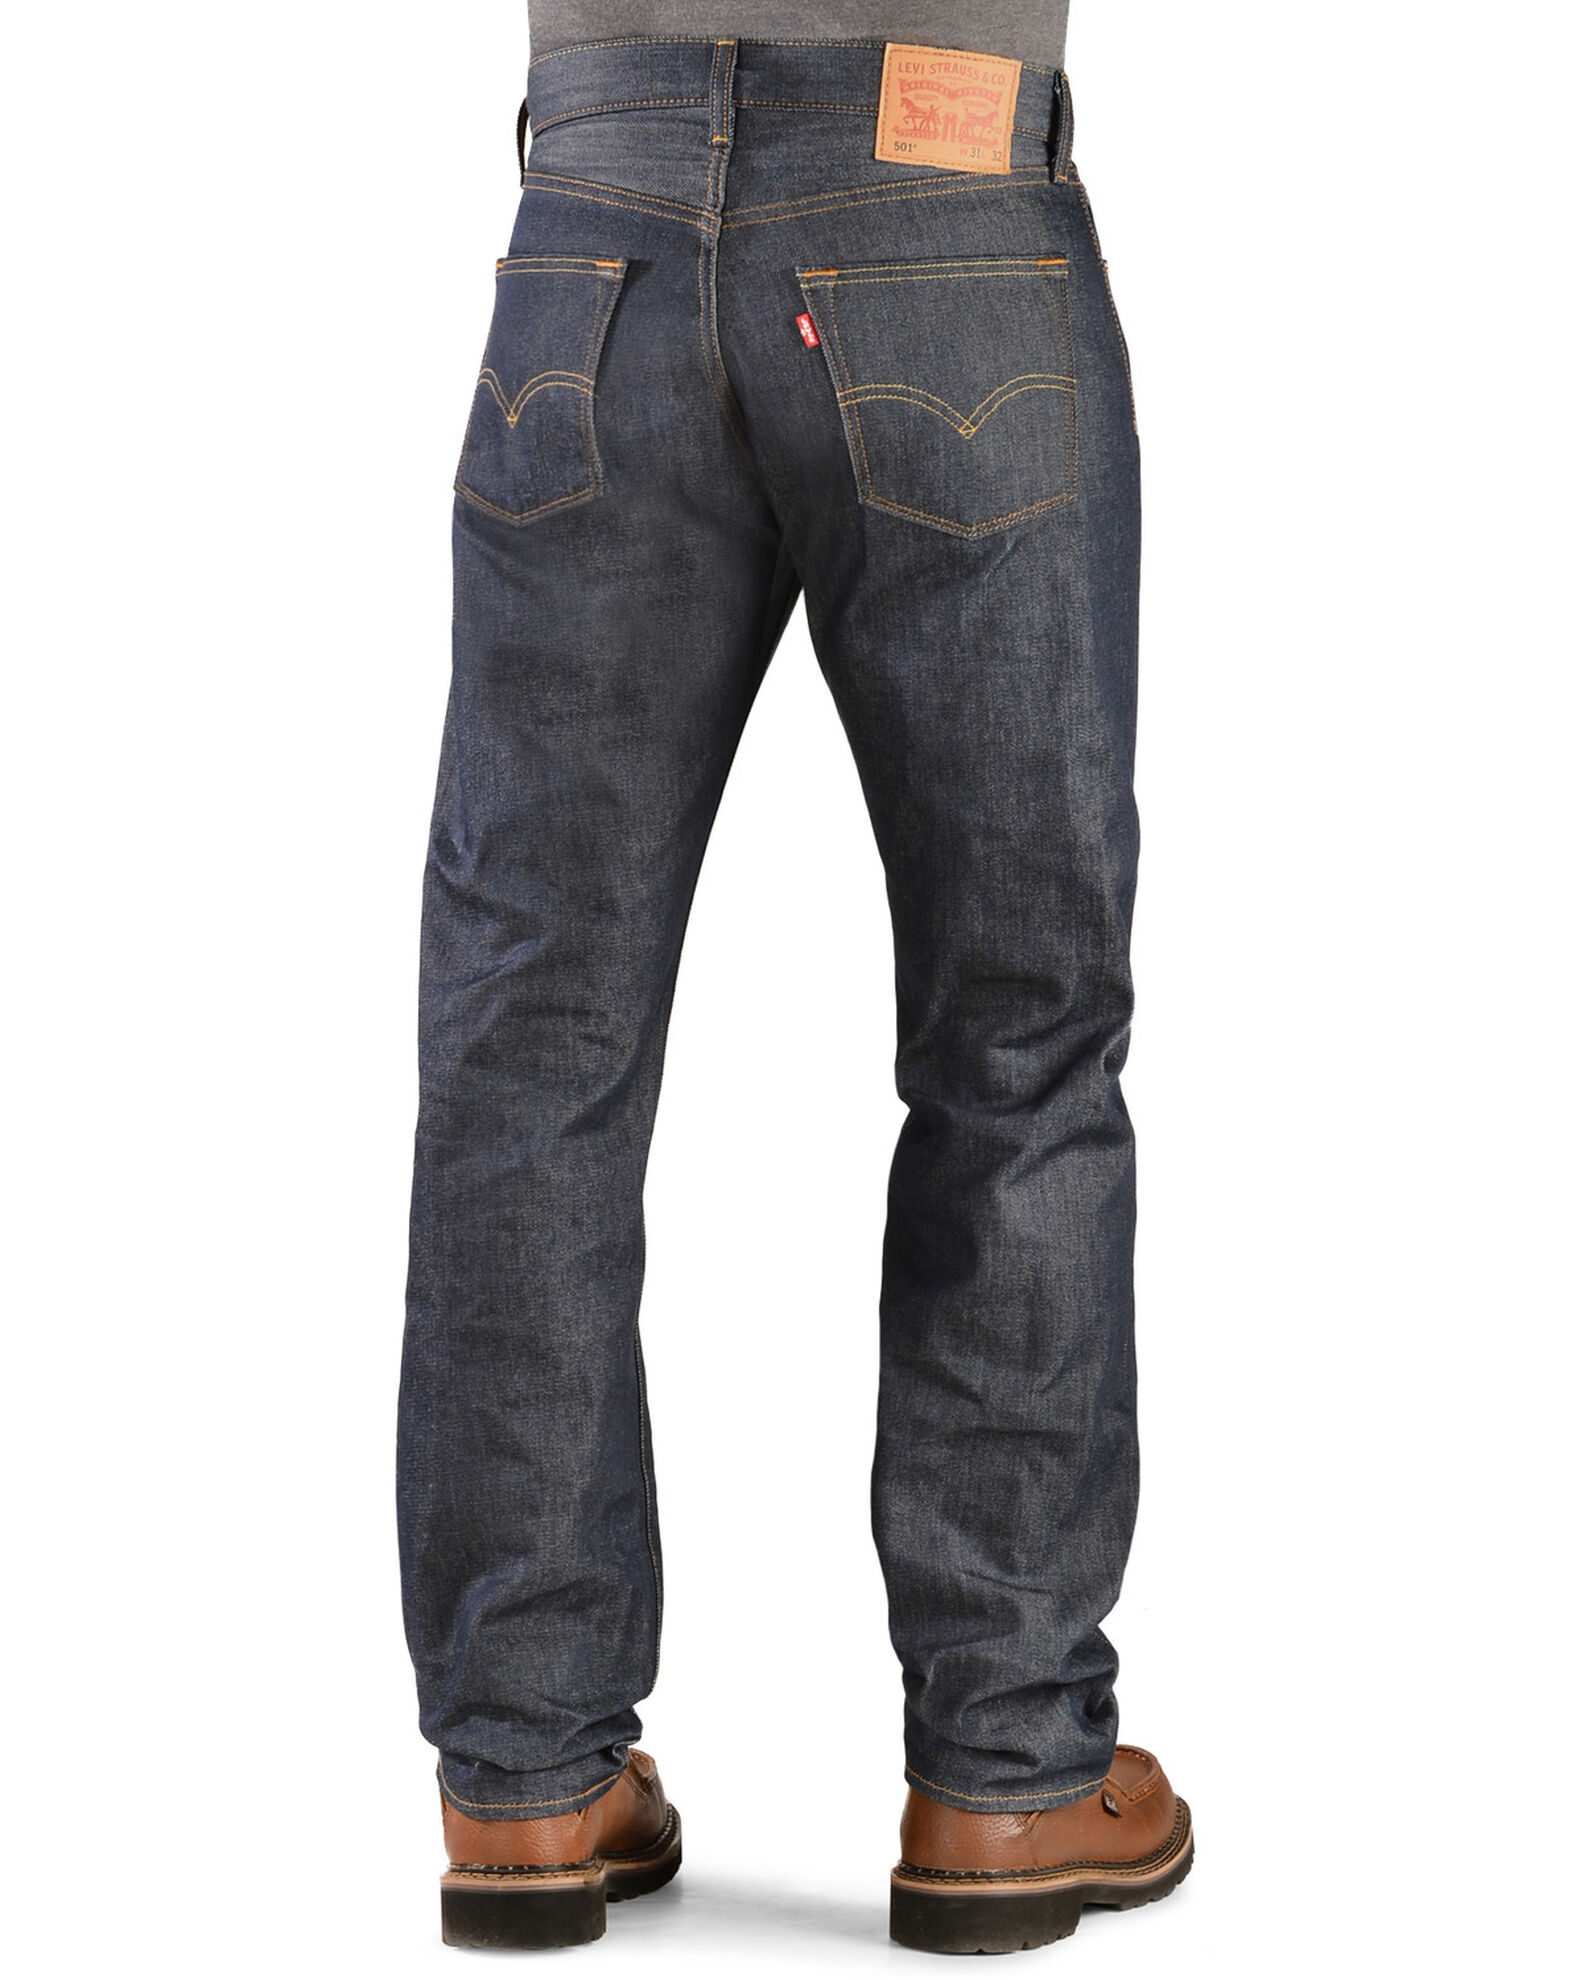 beest Kapper Superioriteit Levi's Men's 501 Original Shrink-to-Fit Regular Straight Leg Jeans -  Country Outfitter